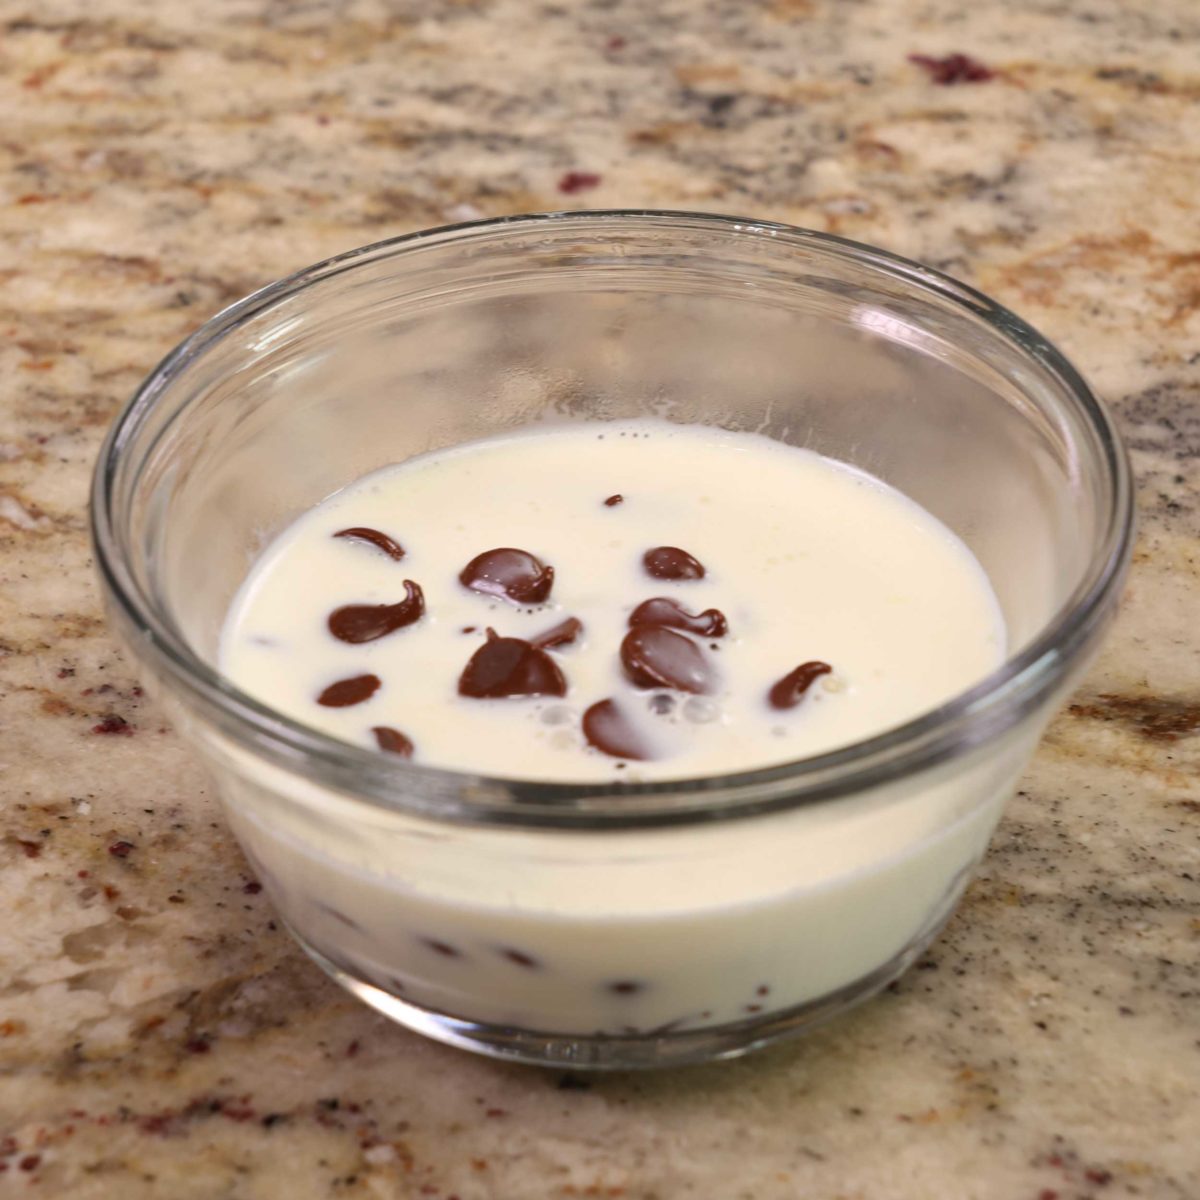 chocolate chips and warmed cream in a small clear glass bowl